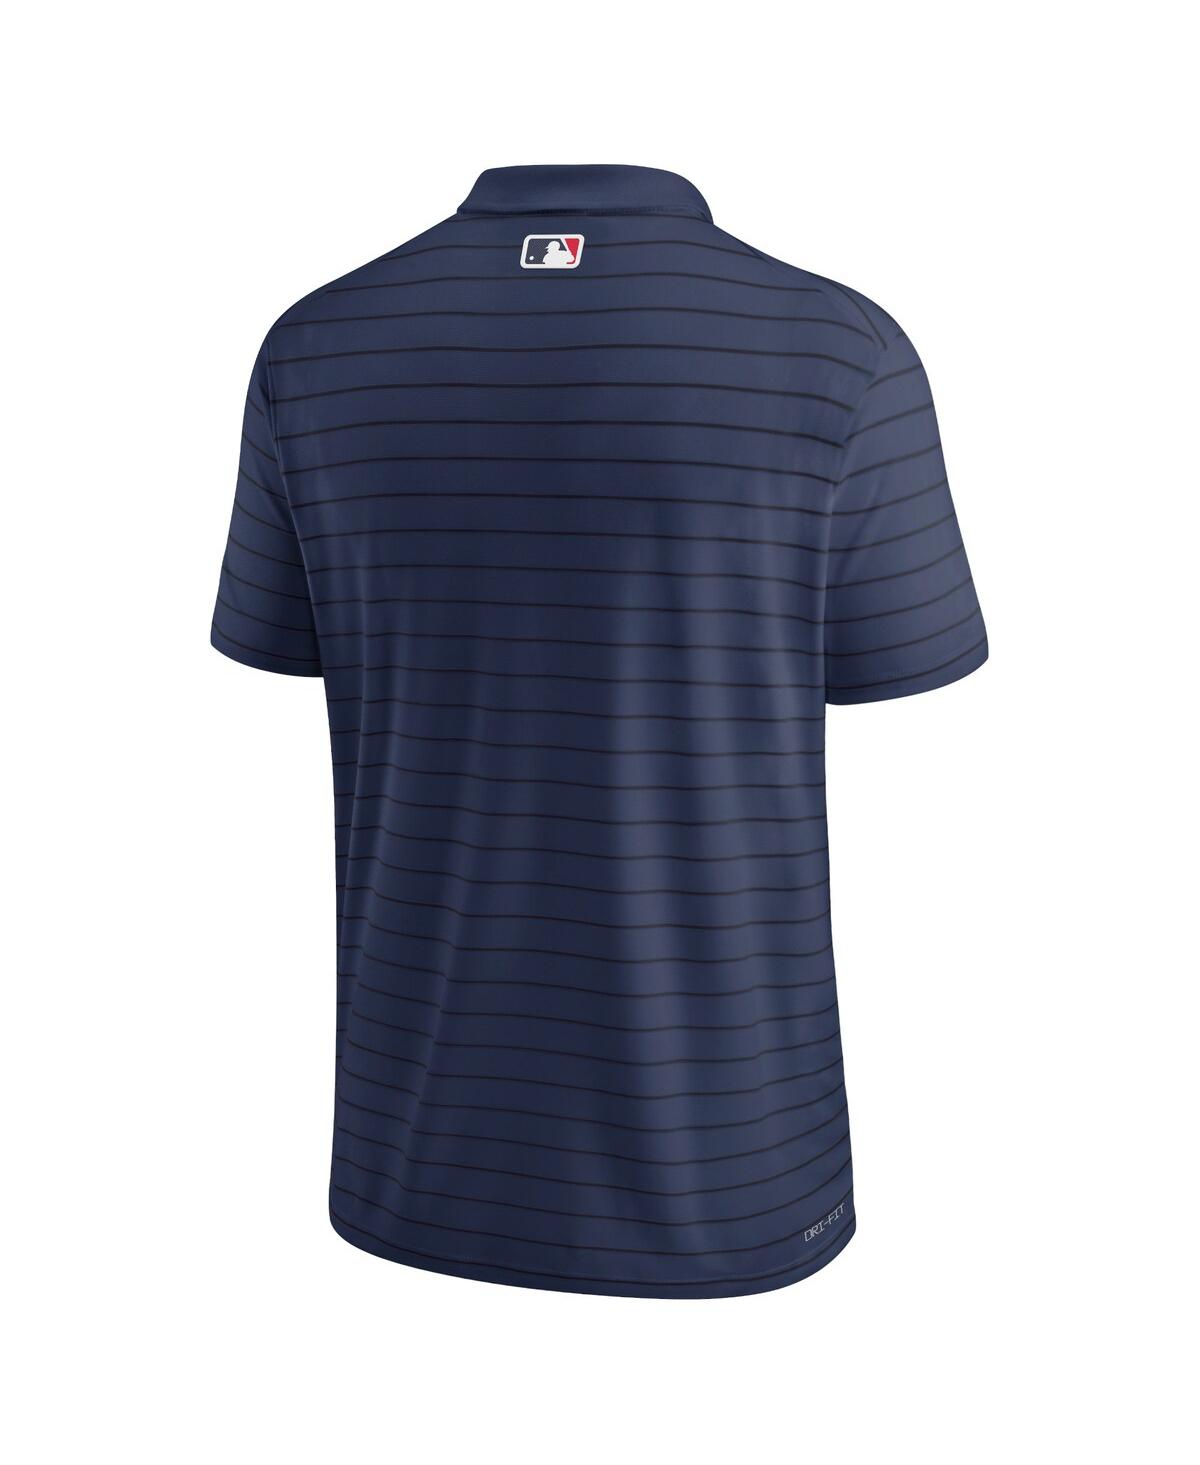 Nike Dri-Fit Victory Striped (MLB St. Louis Cardinals) Men's Polo